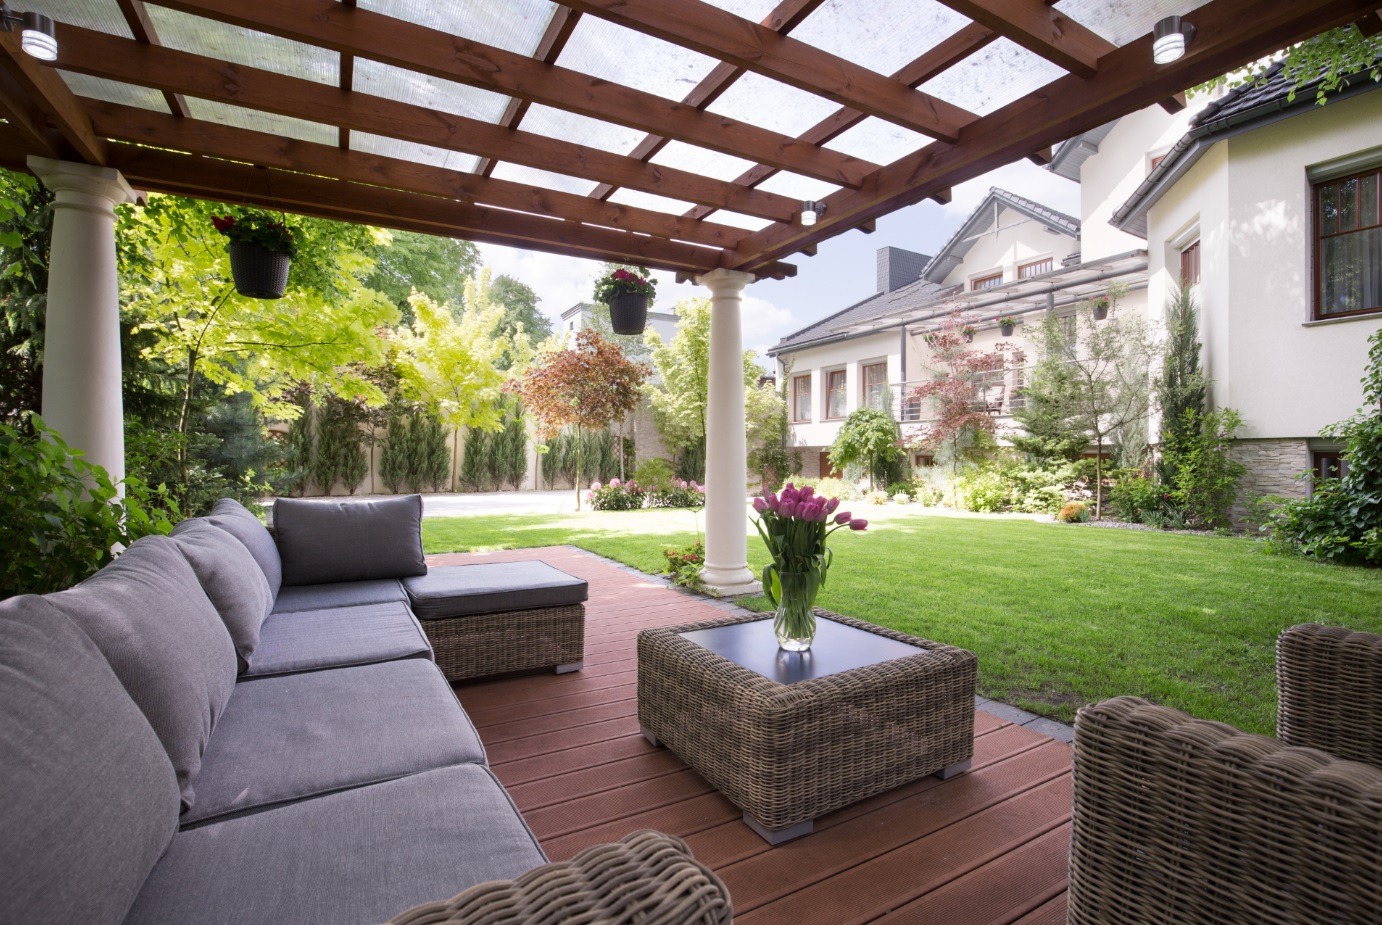 Turn Your Outdoor Space into a Resort-like Luxury!